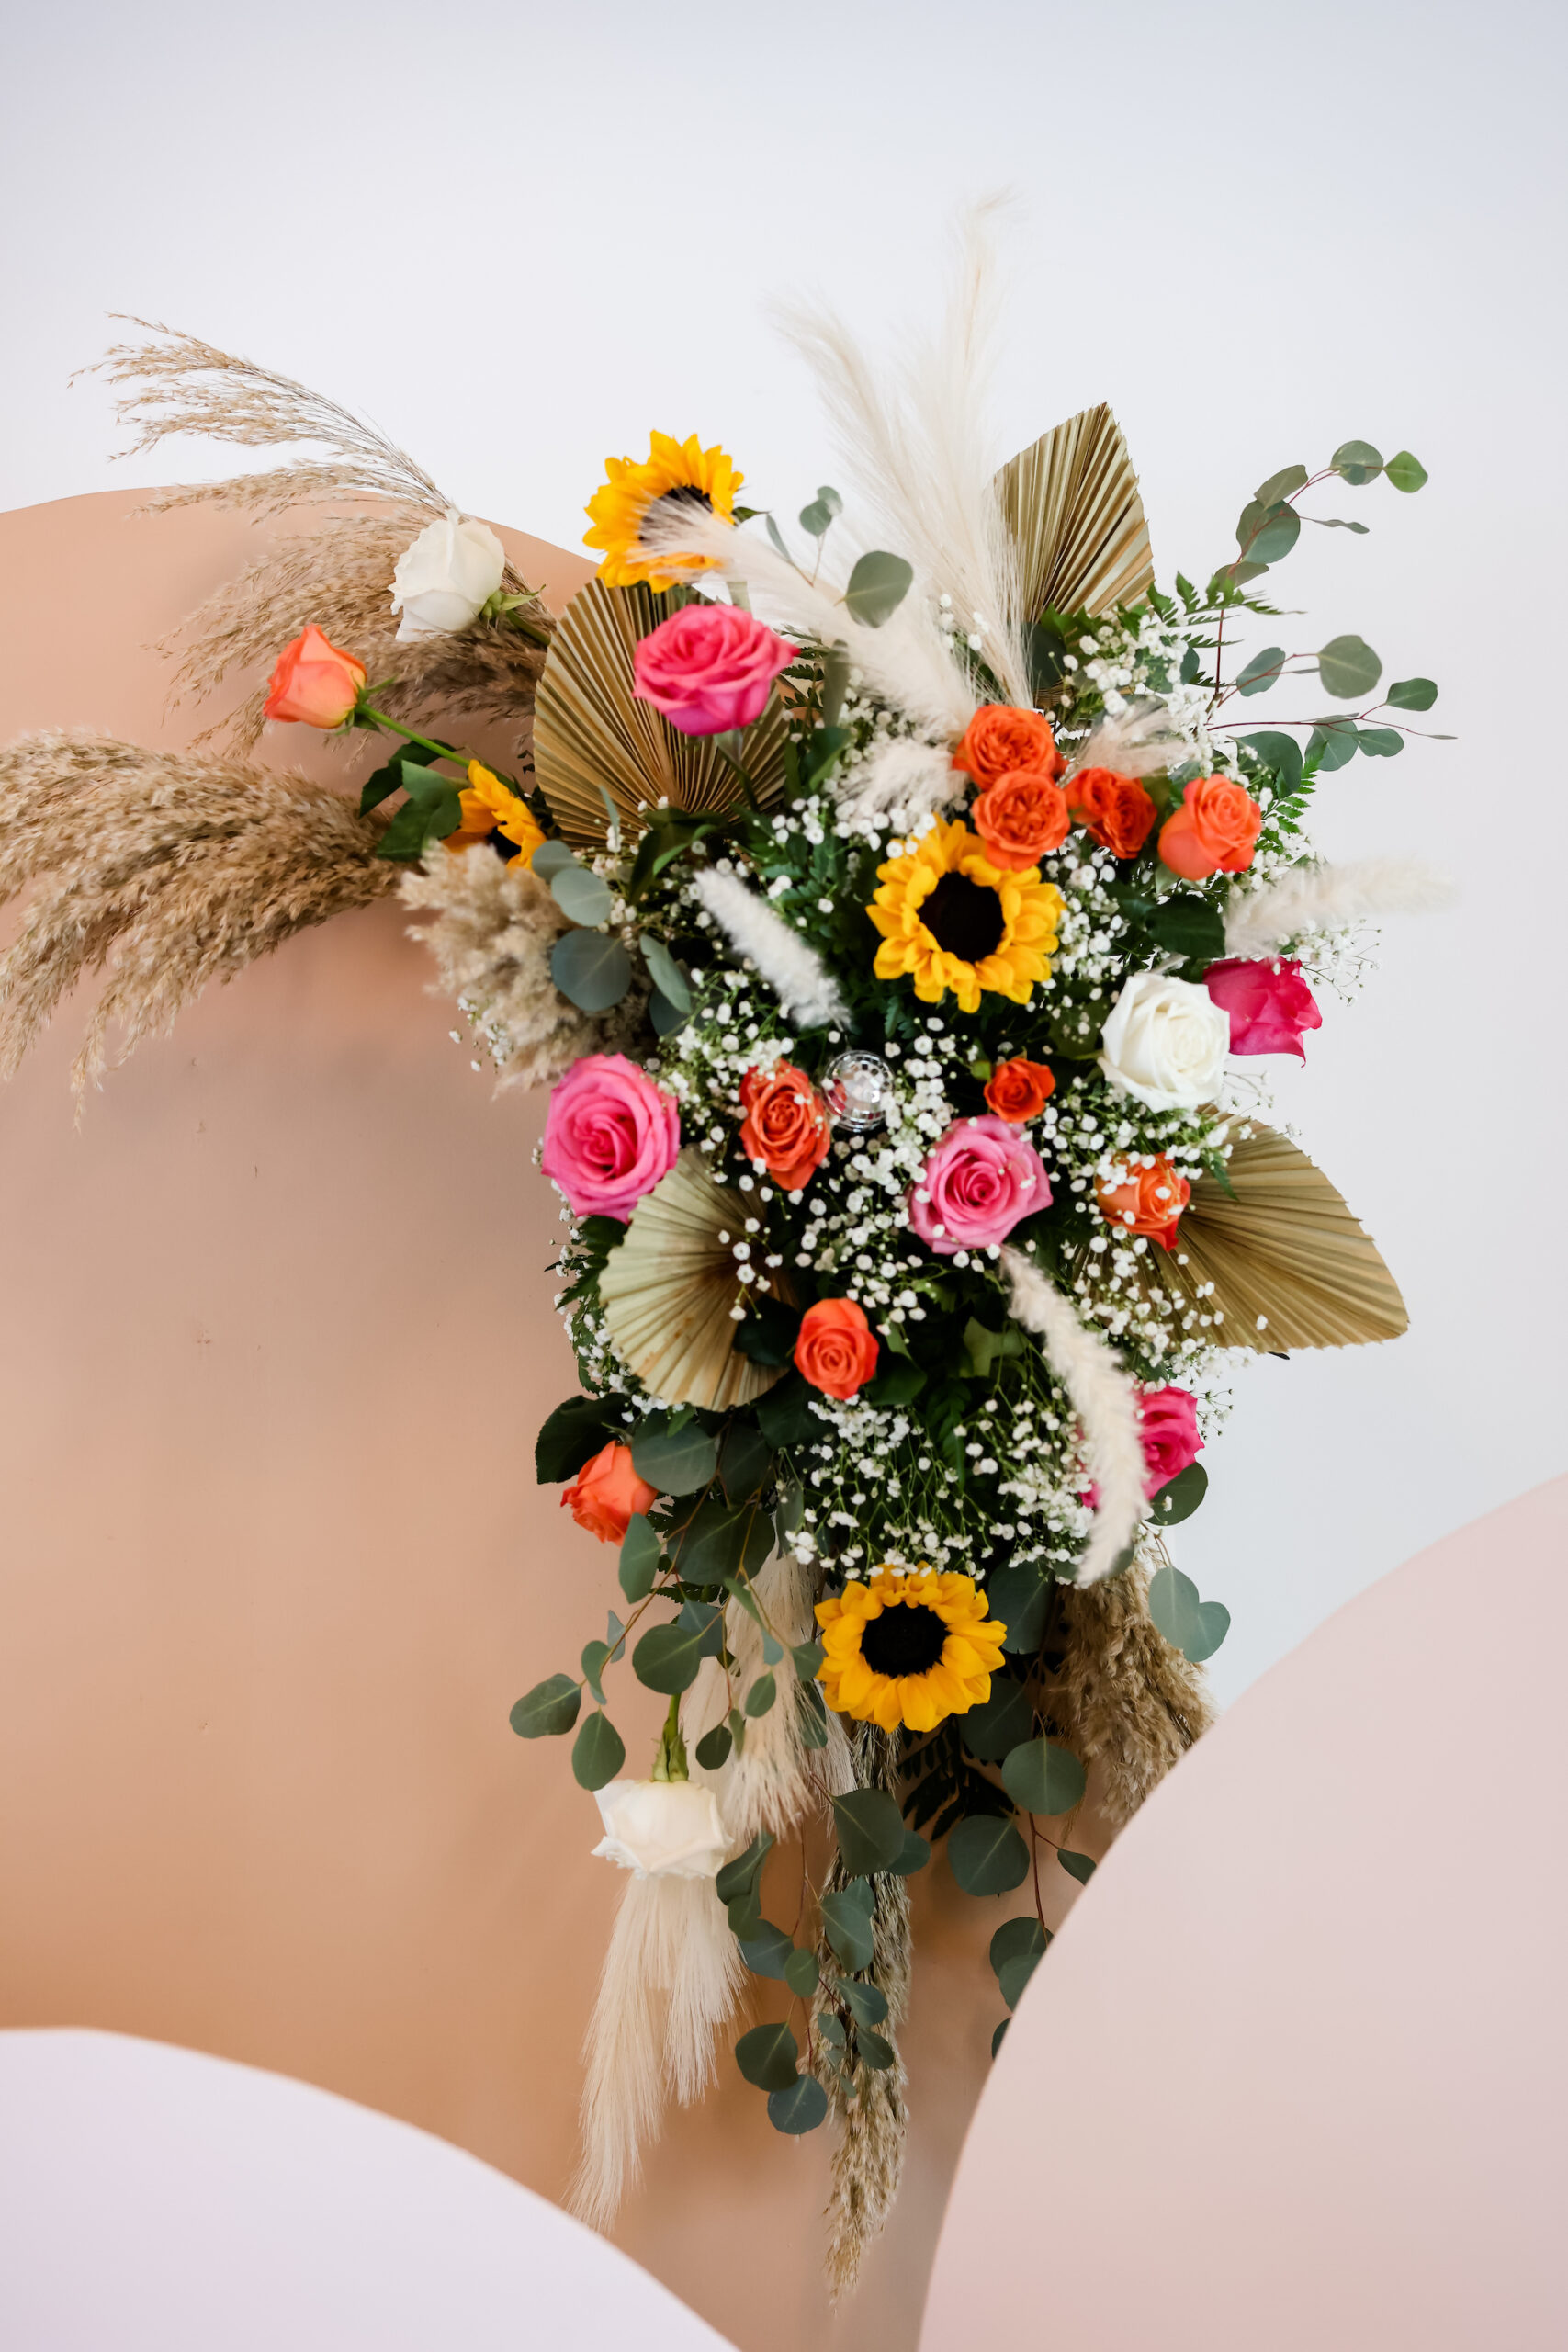 Boho Pink, Orange, and White Roses with Sunflowers, Palm Leaves, Pampas Grass, Baby's Breath, and Wheat Wedding Floral Ceremony Arch Arrangement Ideas